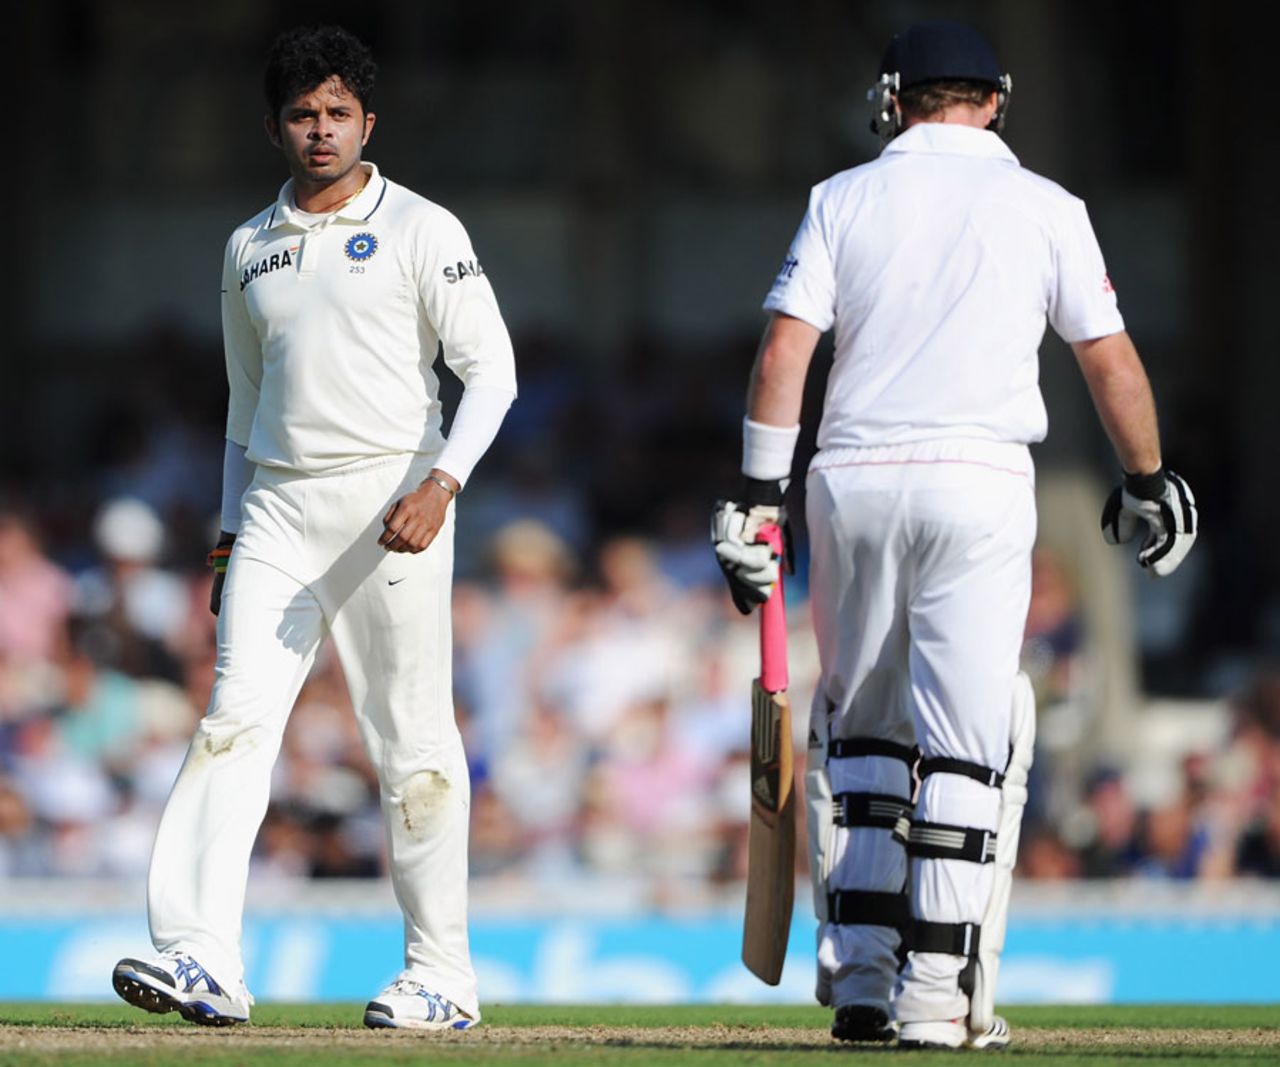 Sreesanth gives Ian Bell a stare, England v India, 4th Test, The Oval, 2nd day, August 19, 2011